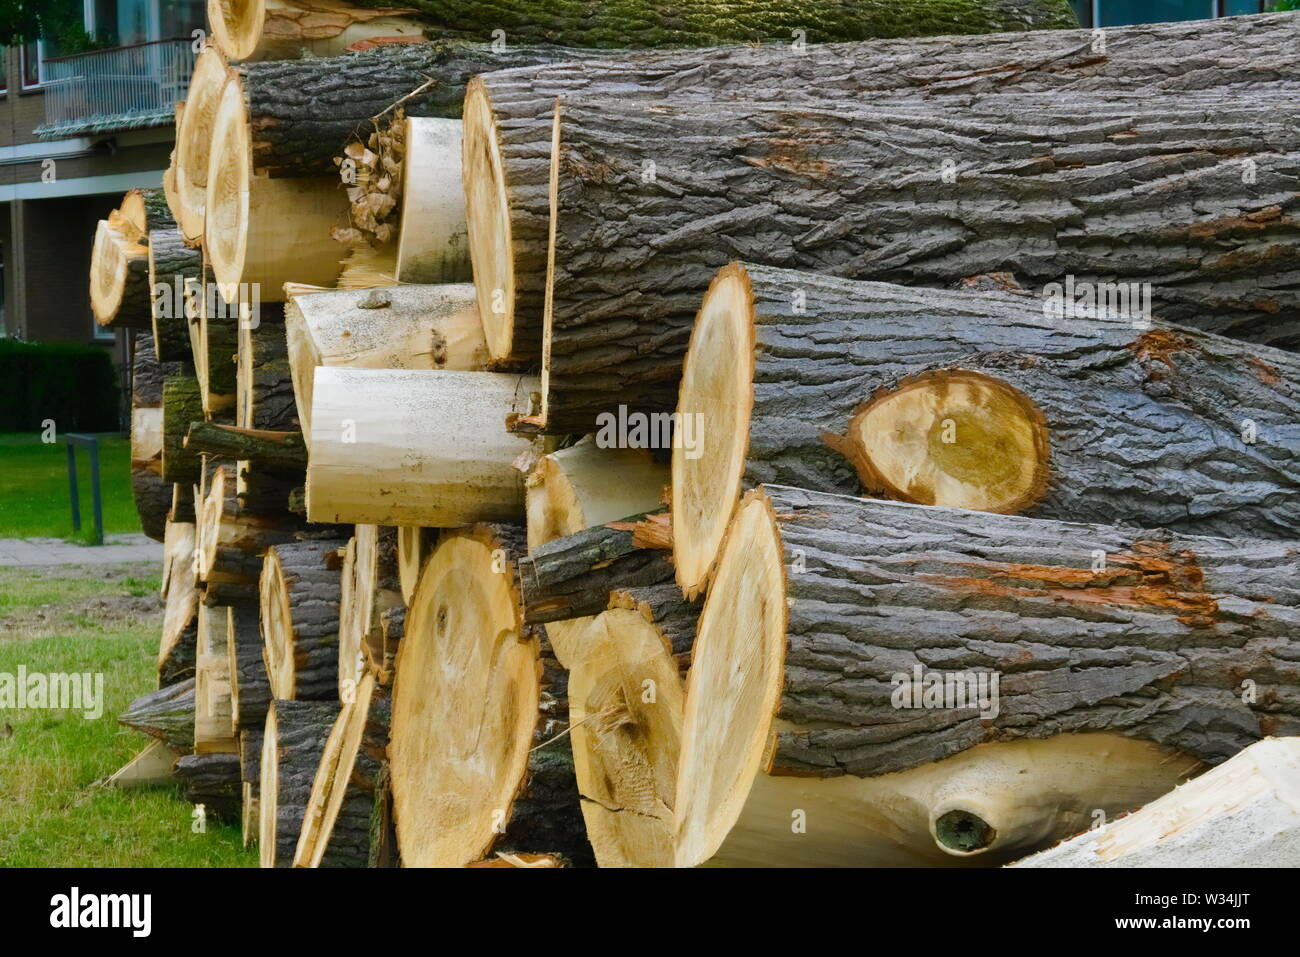 cut down lumber stacked on each other Stock Photo